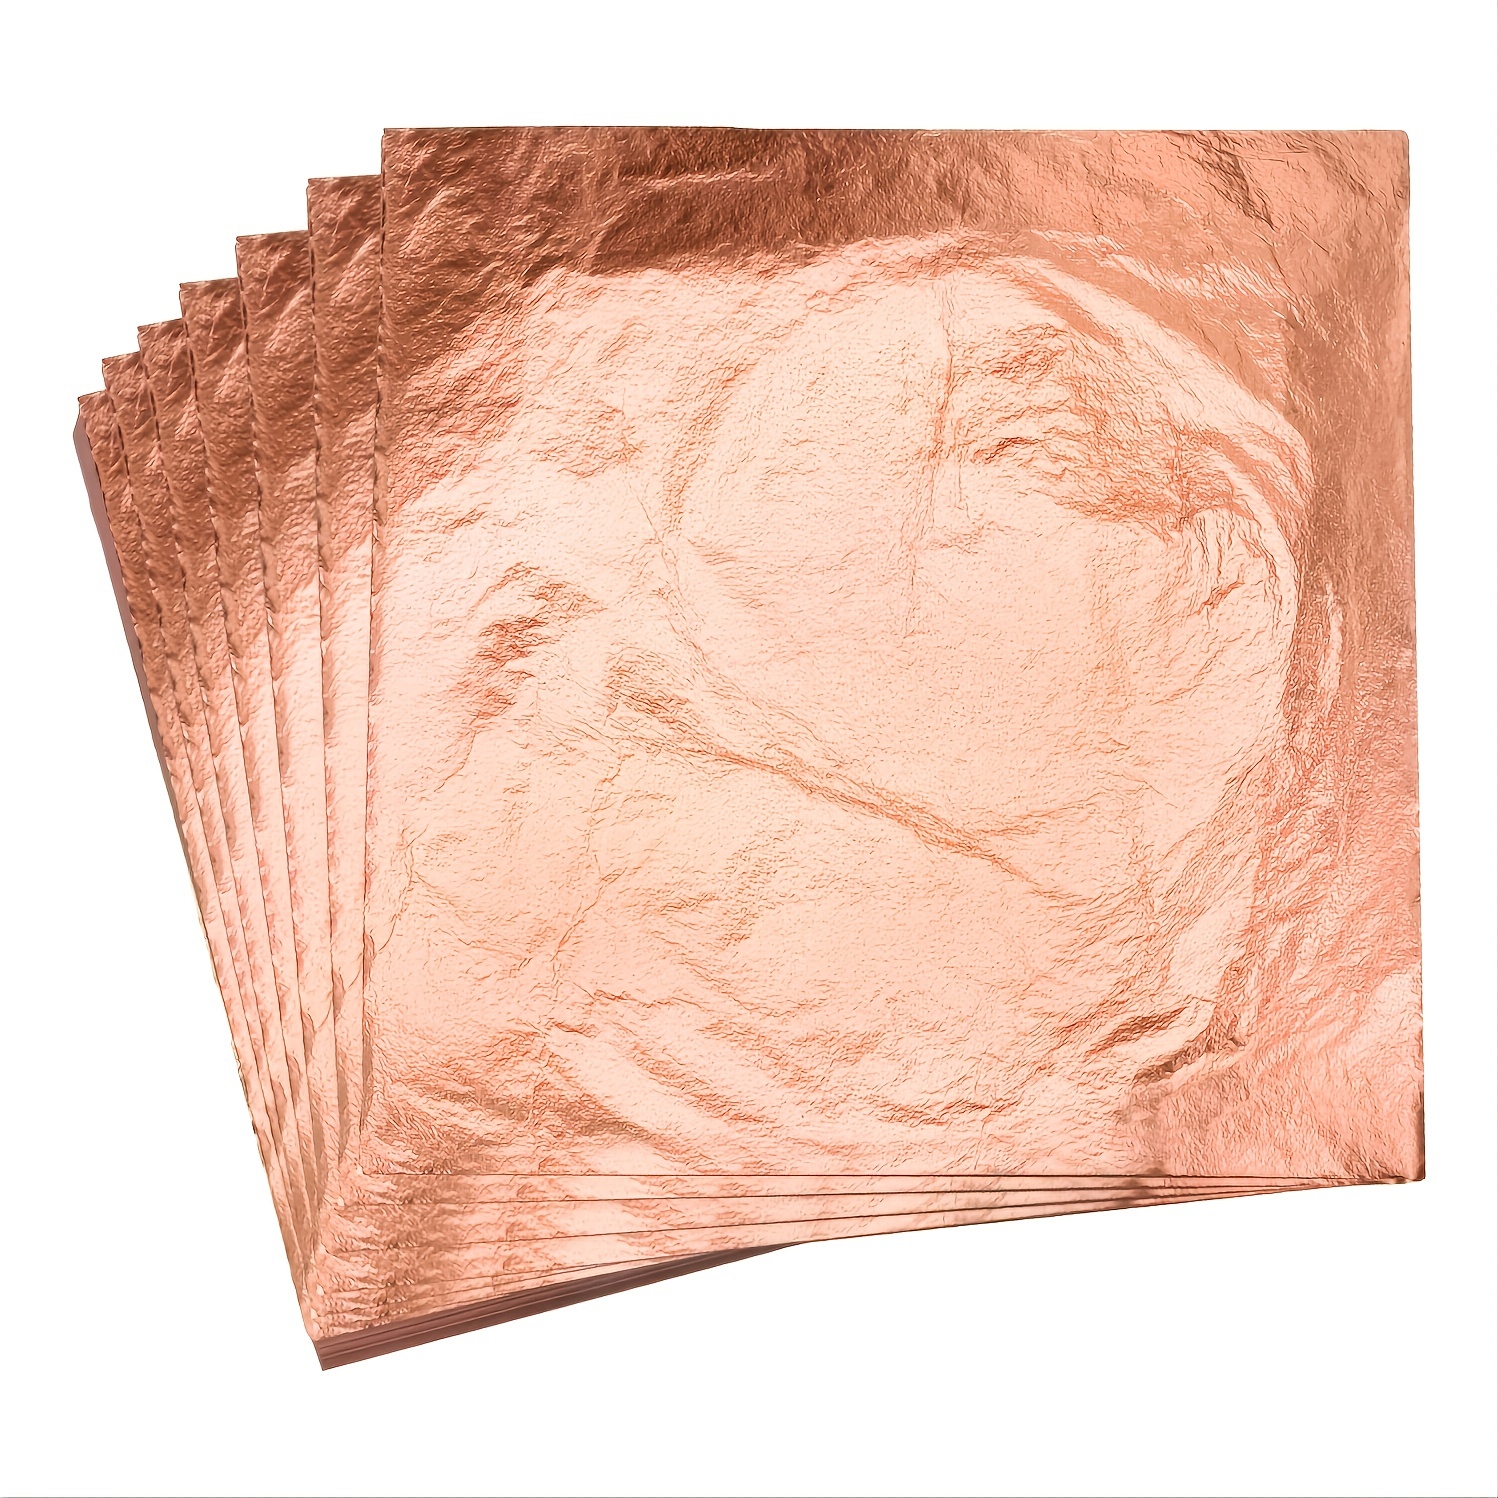 DECONICER 300pcs Imitaion Gold Leaf Sheets for Resin.3 Multi-Color Gold  Foil Sheets (Gold,Silver,Rose Gold) are Suitable for